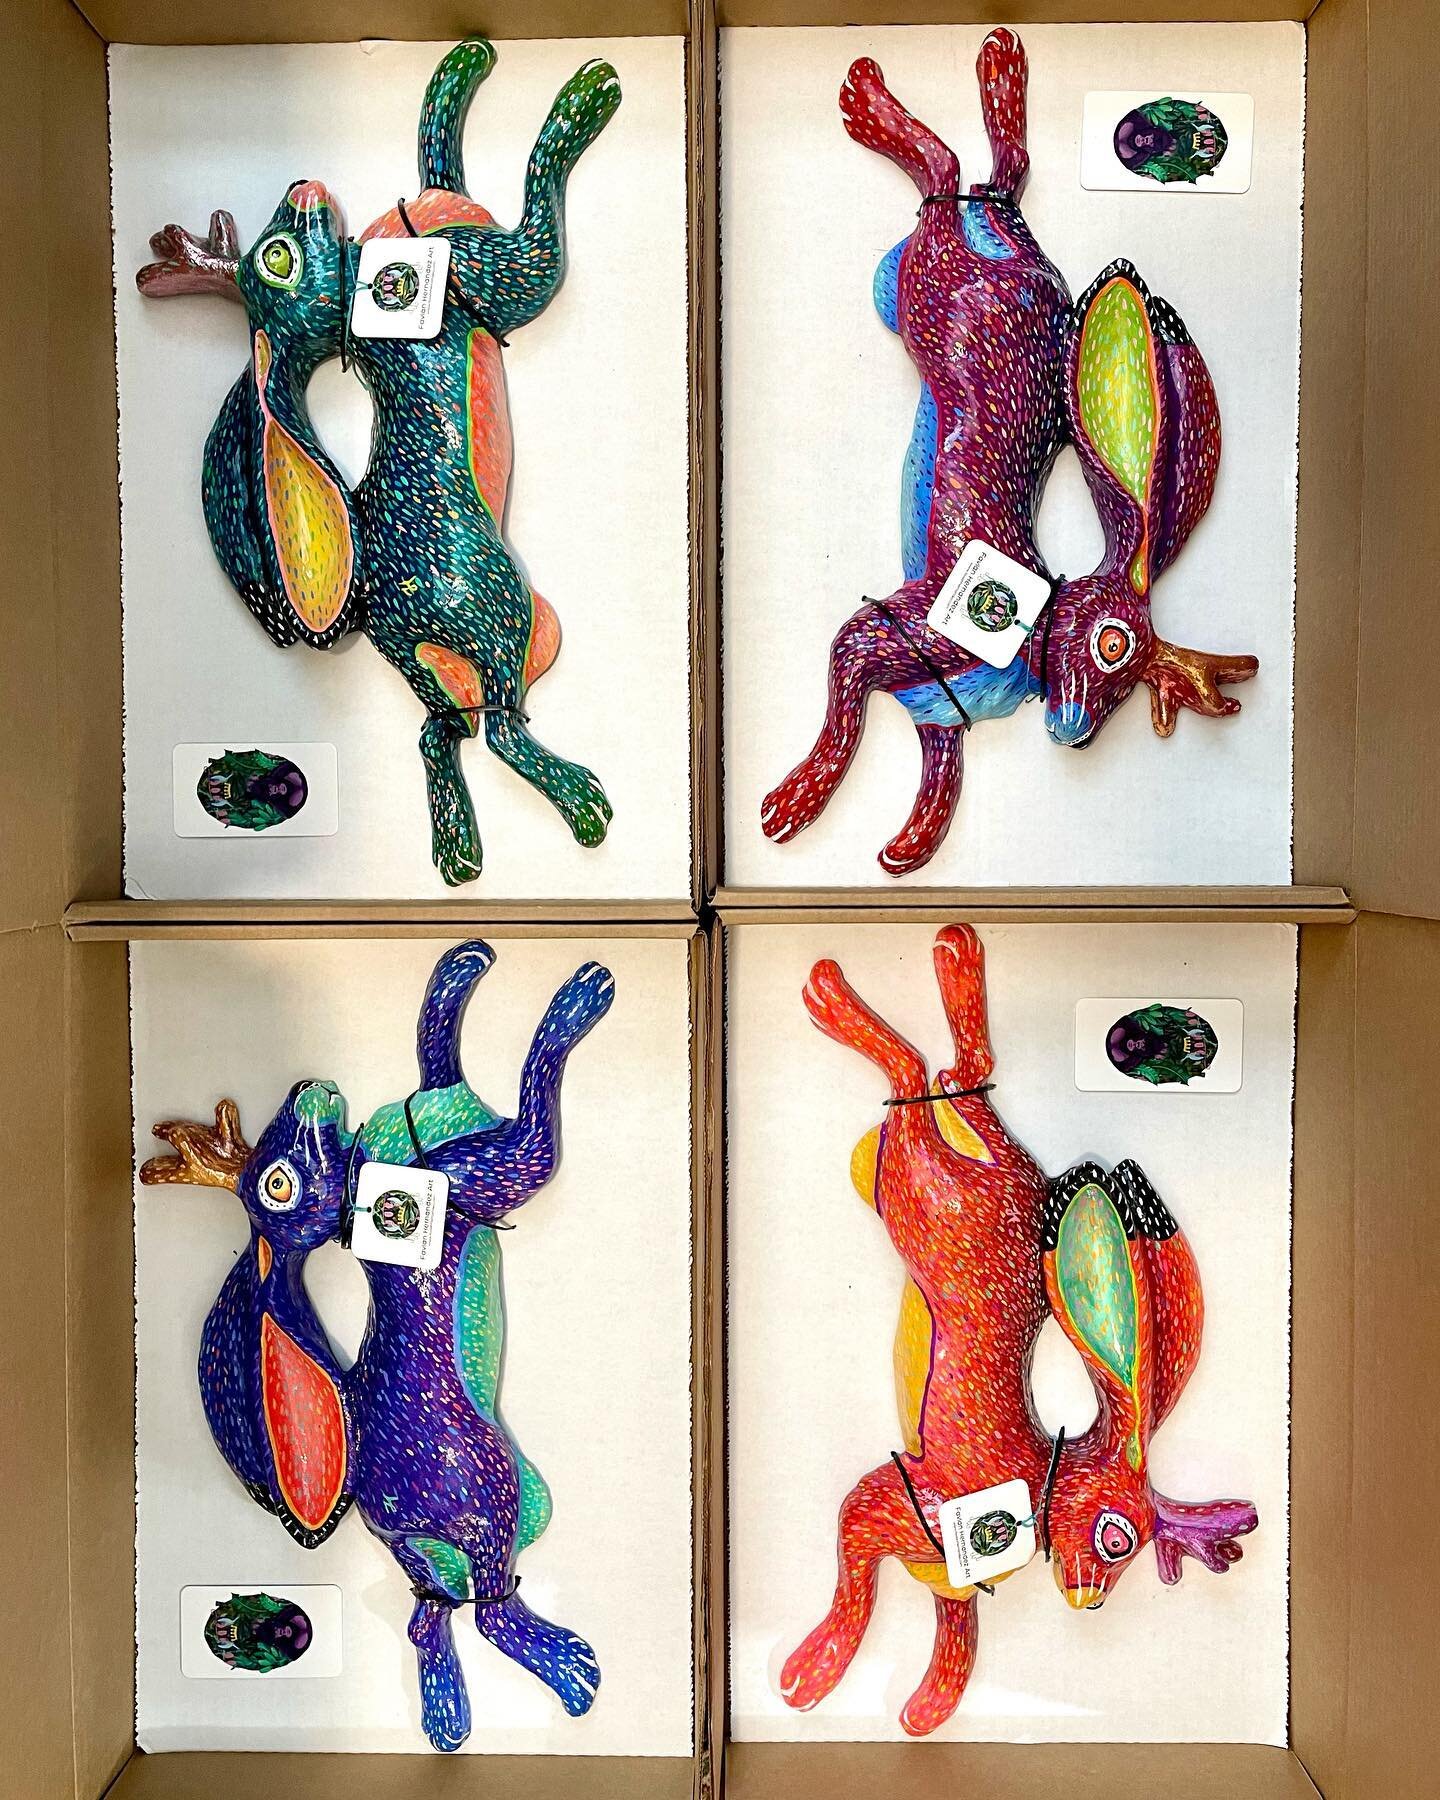 Jumping jackalopes! I have some new pieces available! These wall sculptures can be found @worksofwyominggiftngallery in store and online!